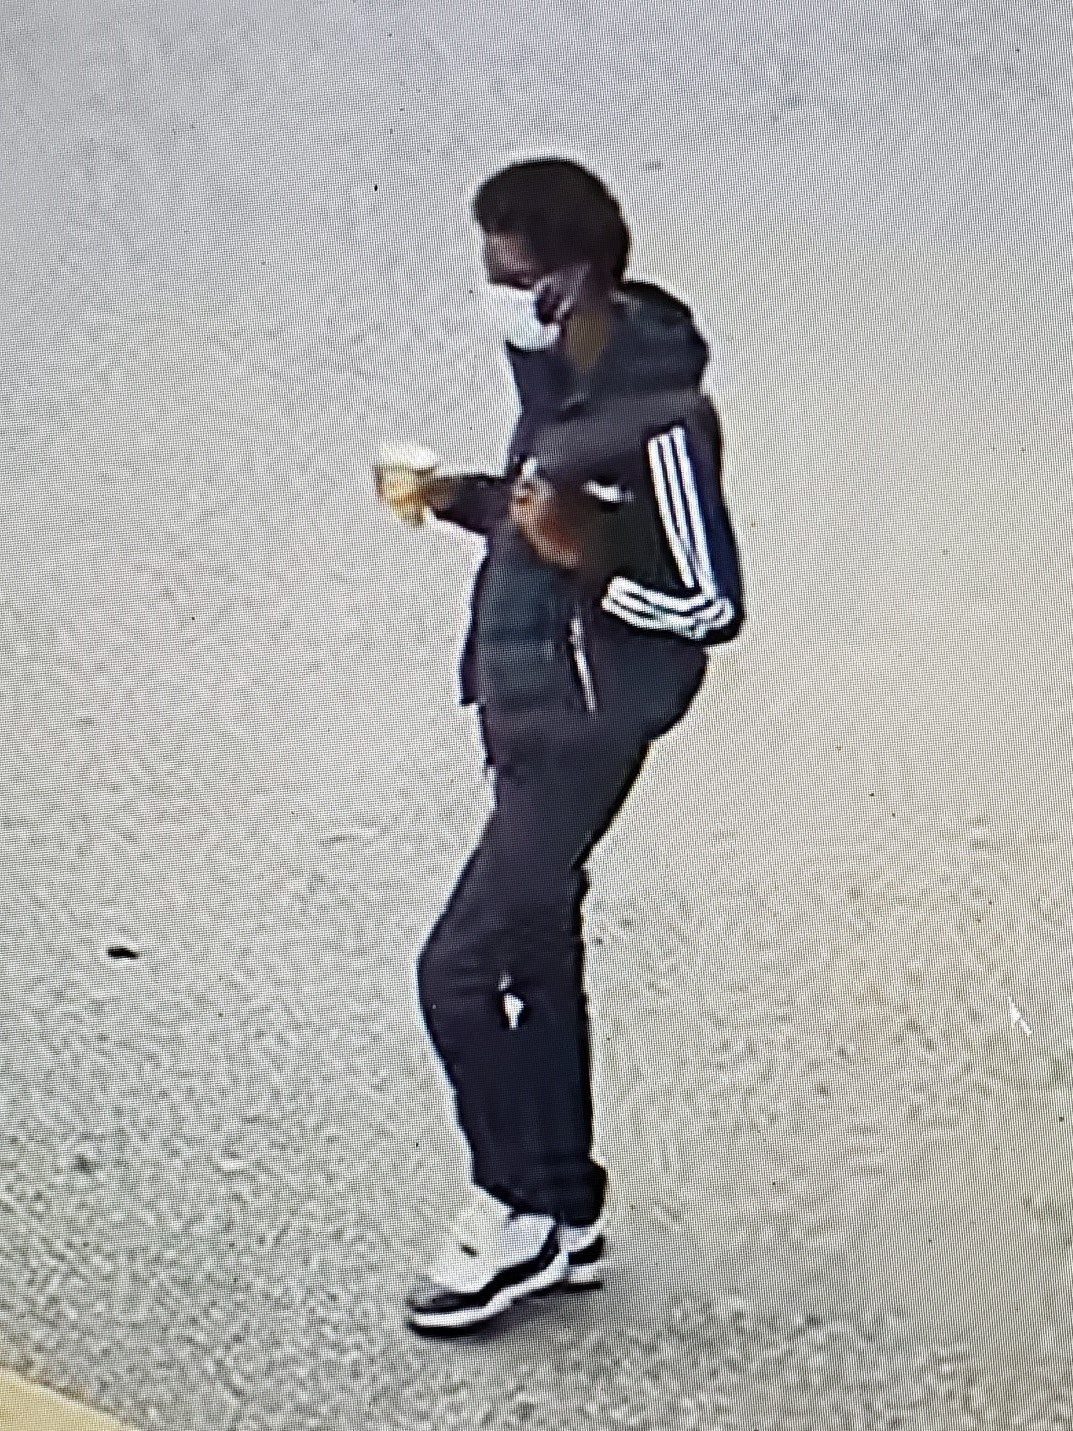 Police say this image of a male person of interest being sought in connection with Marques' death is of Osman Afandy, 23, of the GTA. Afandy has been charged with first-degree murder in the case.